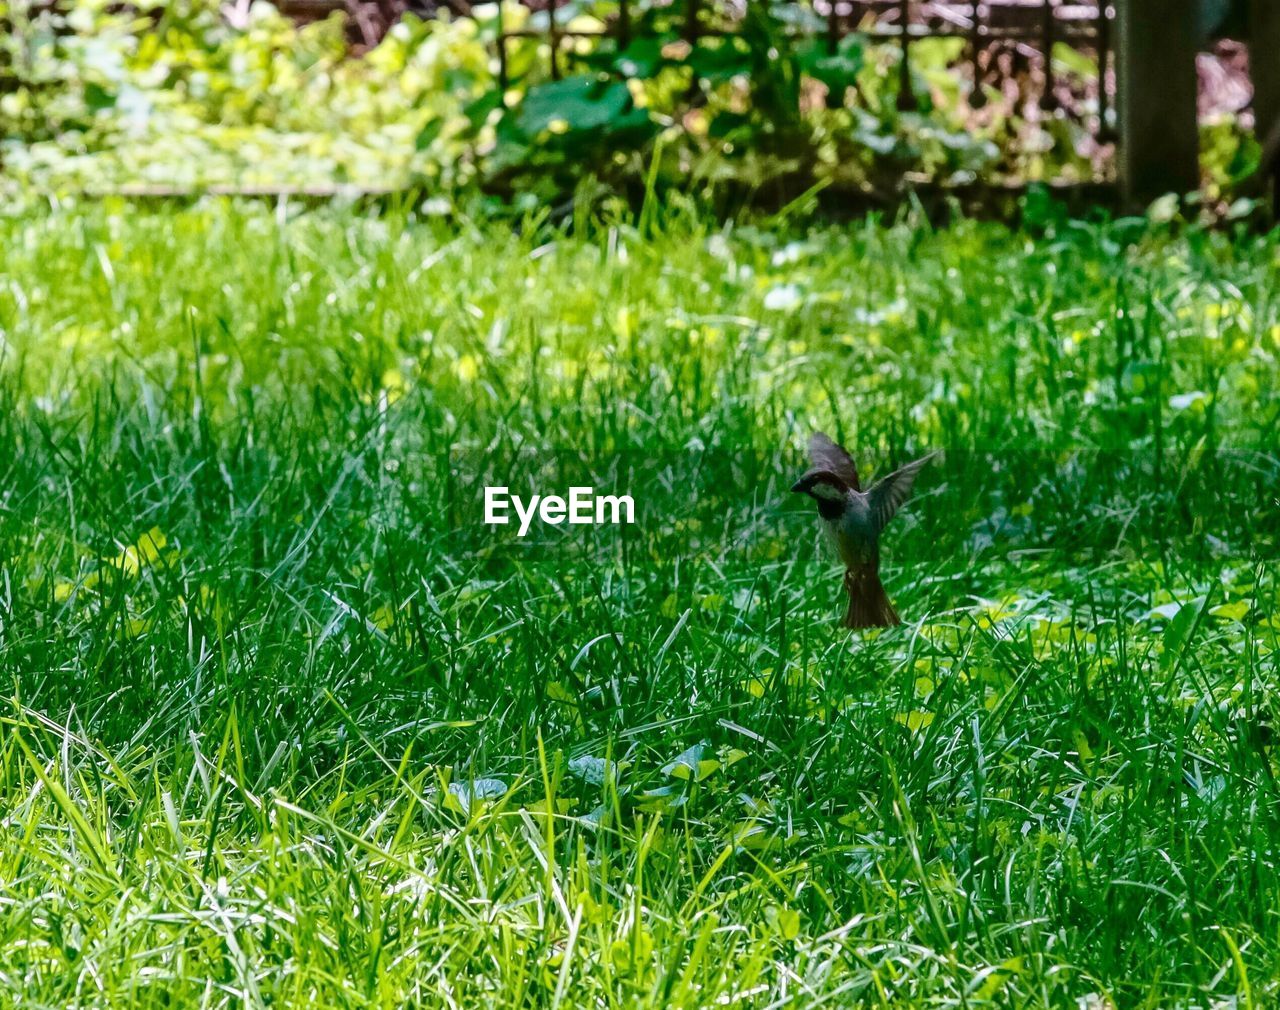 VIEW OF SQUIRREL ON GRASS